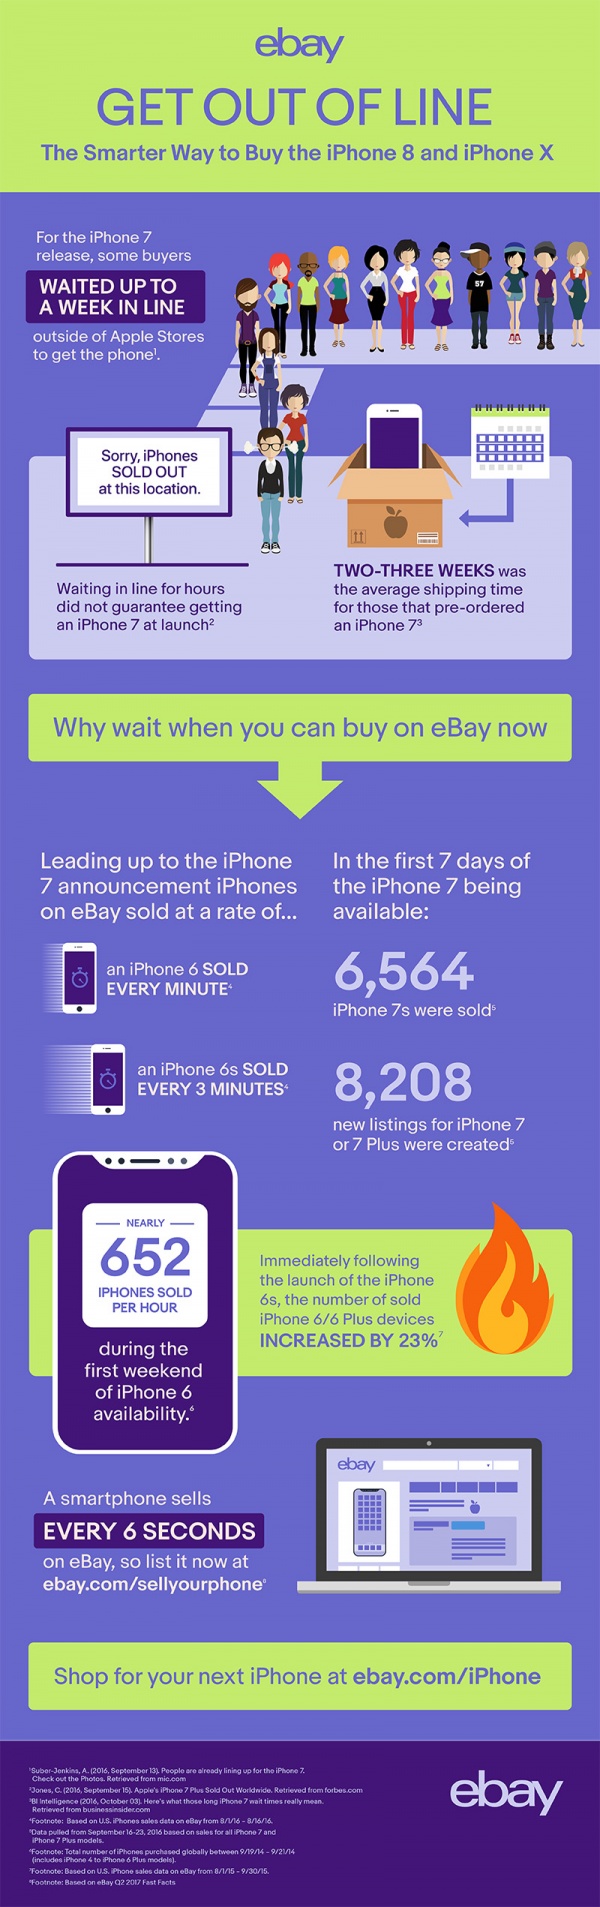 ebay iphone infographic 2017 FINAL